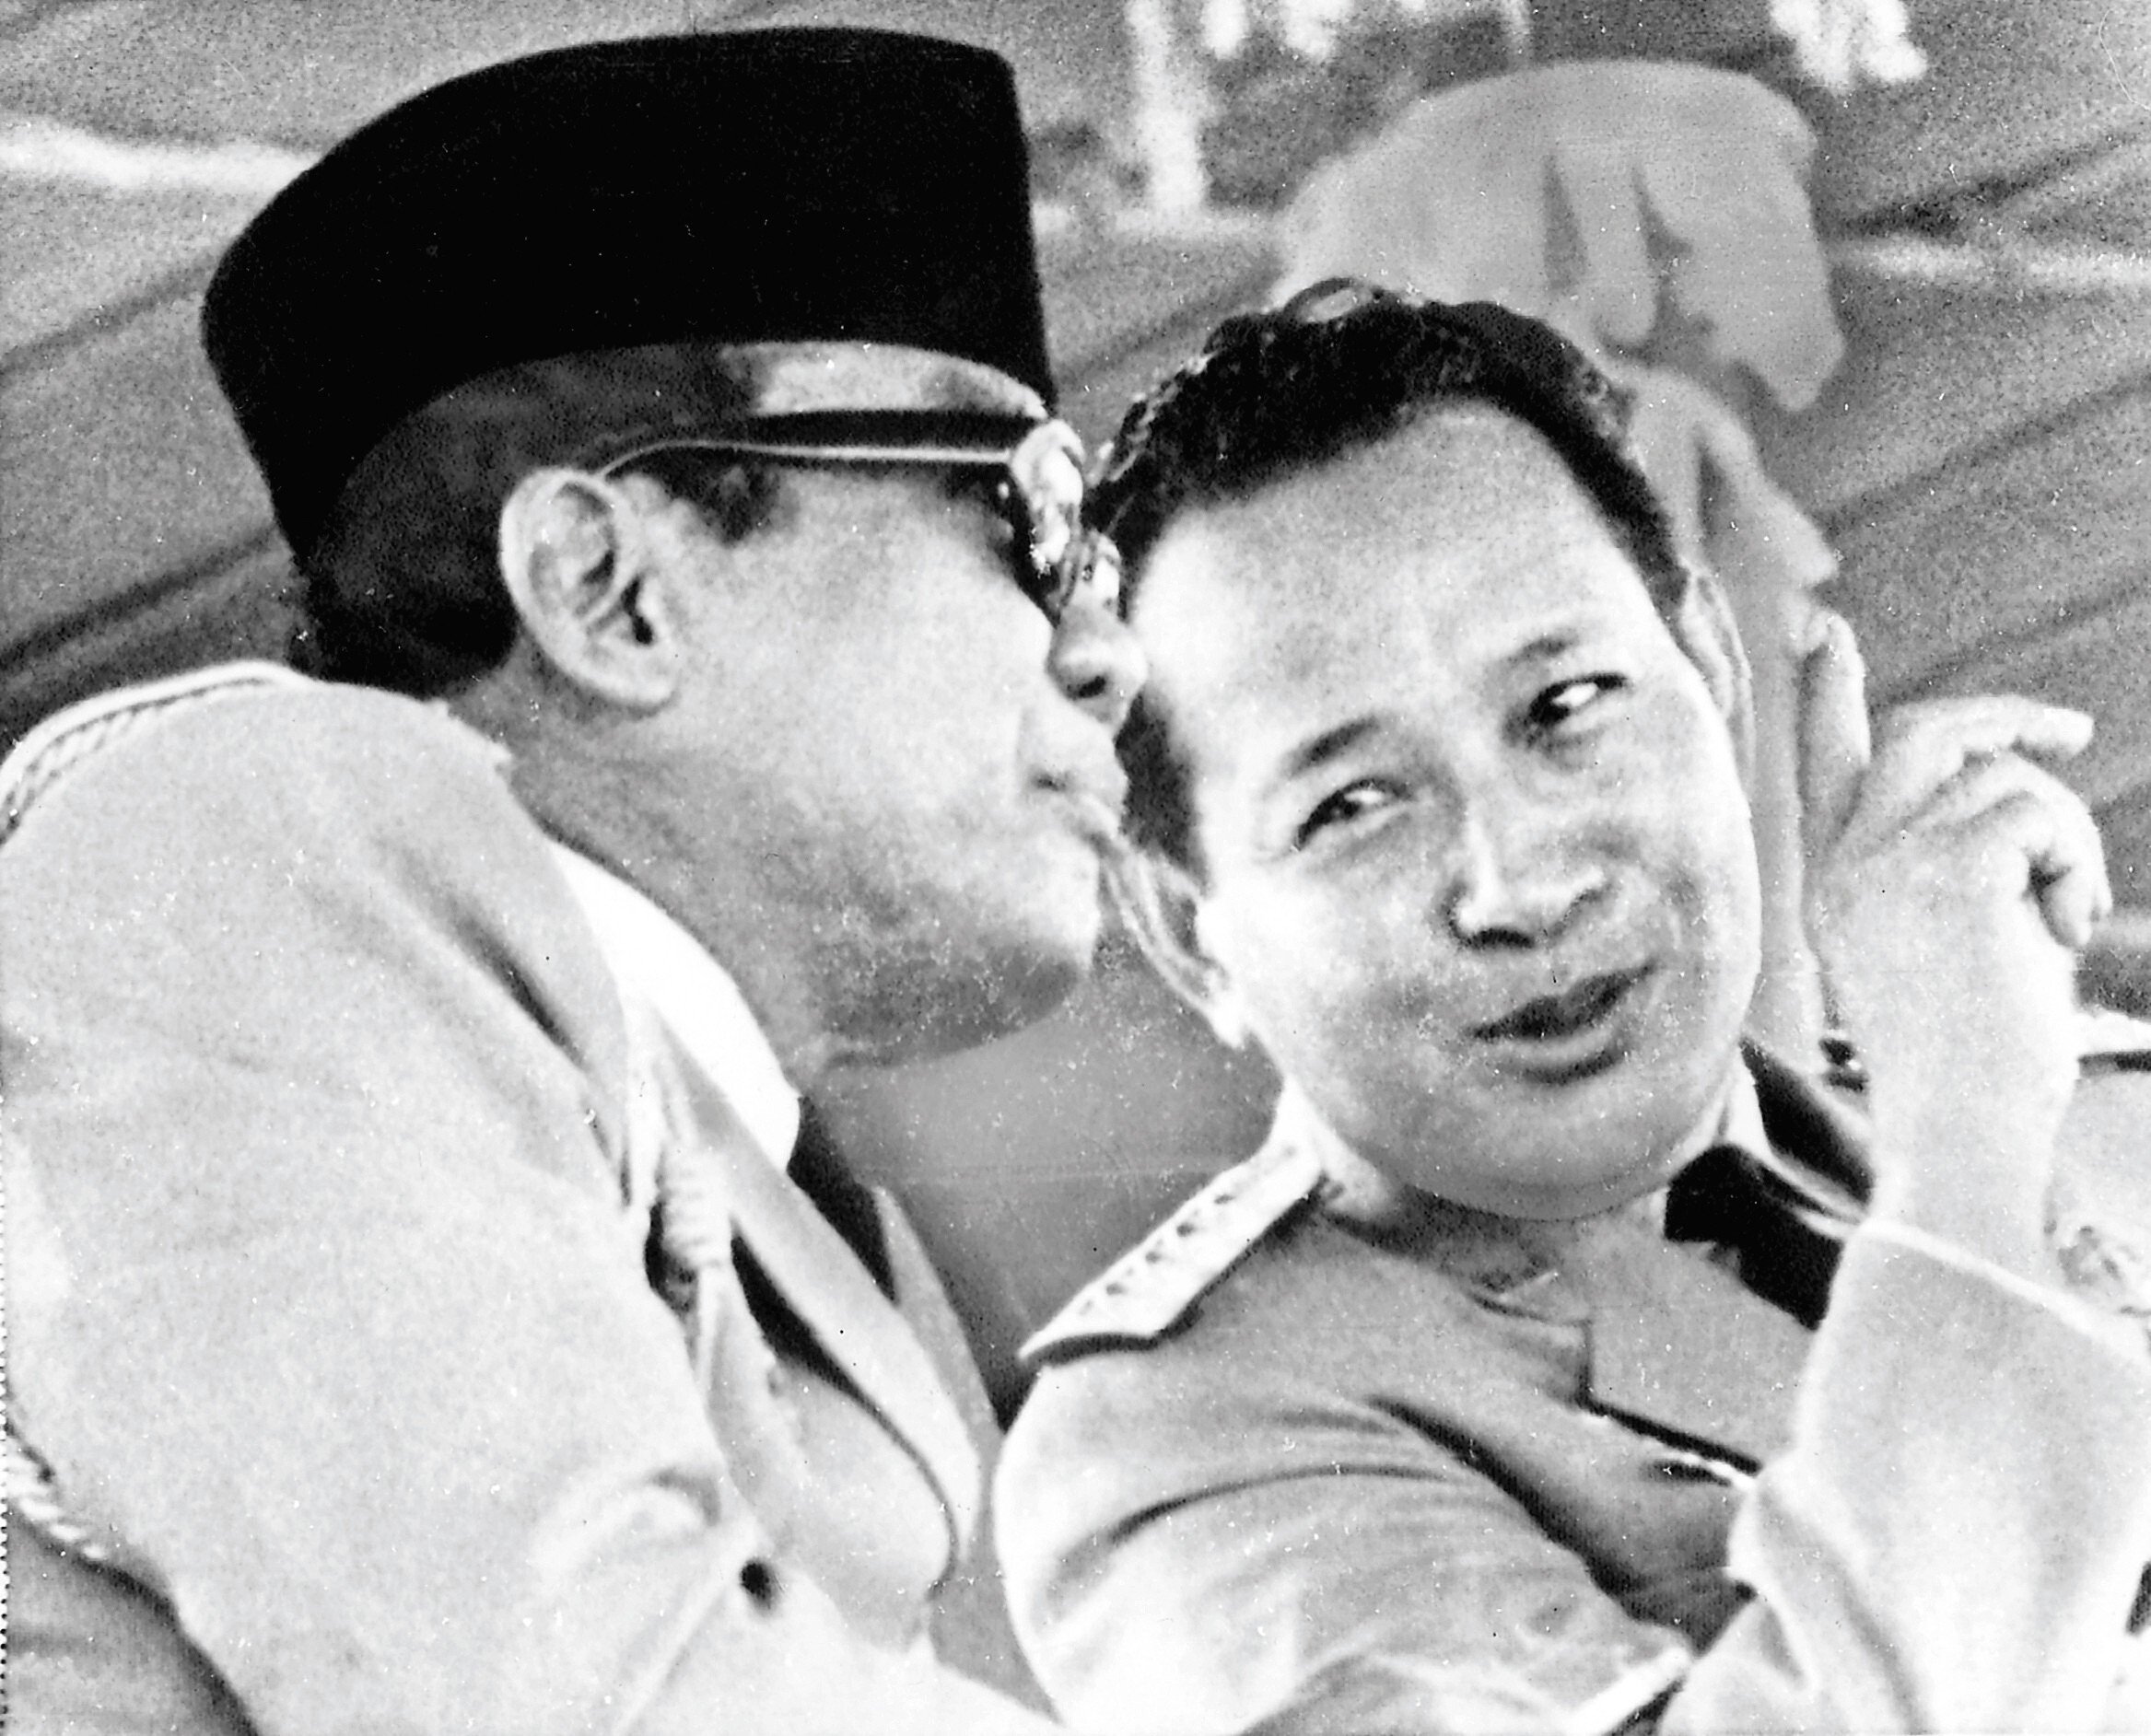 Sukarno, Suharto, and the US-backed mass murder of communists in Indonesia that set the template for Cold War regime change worldwide | South China Morning Post